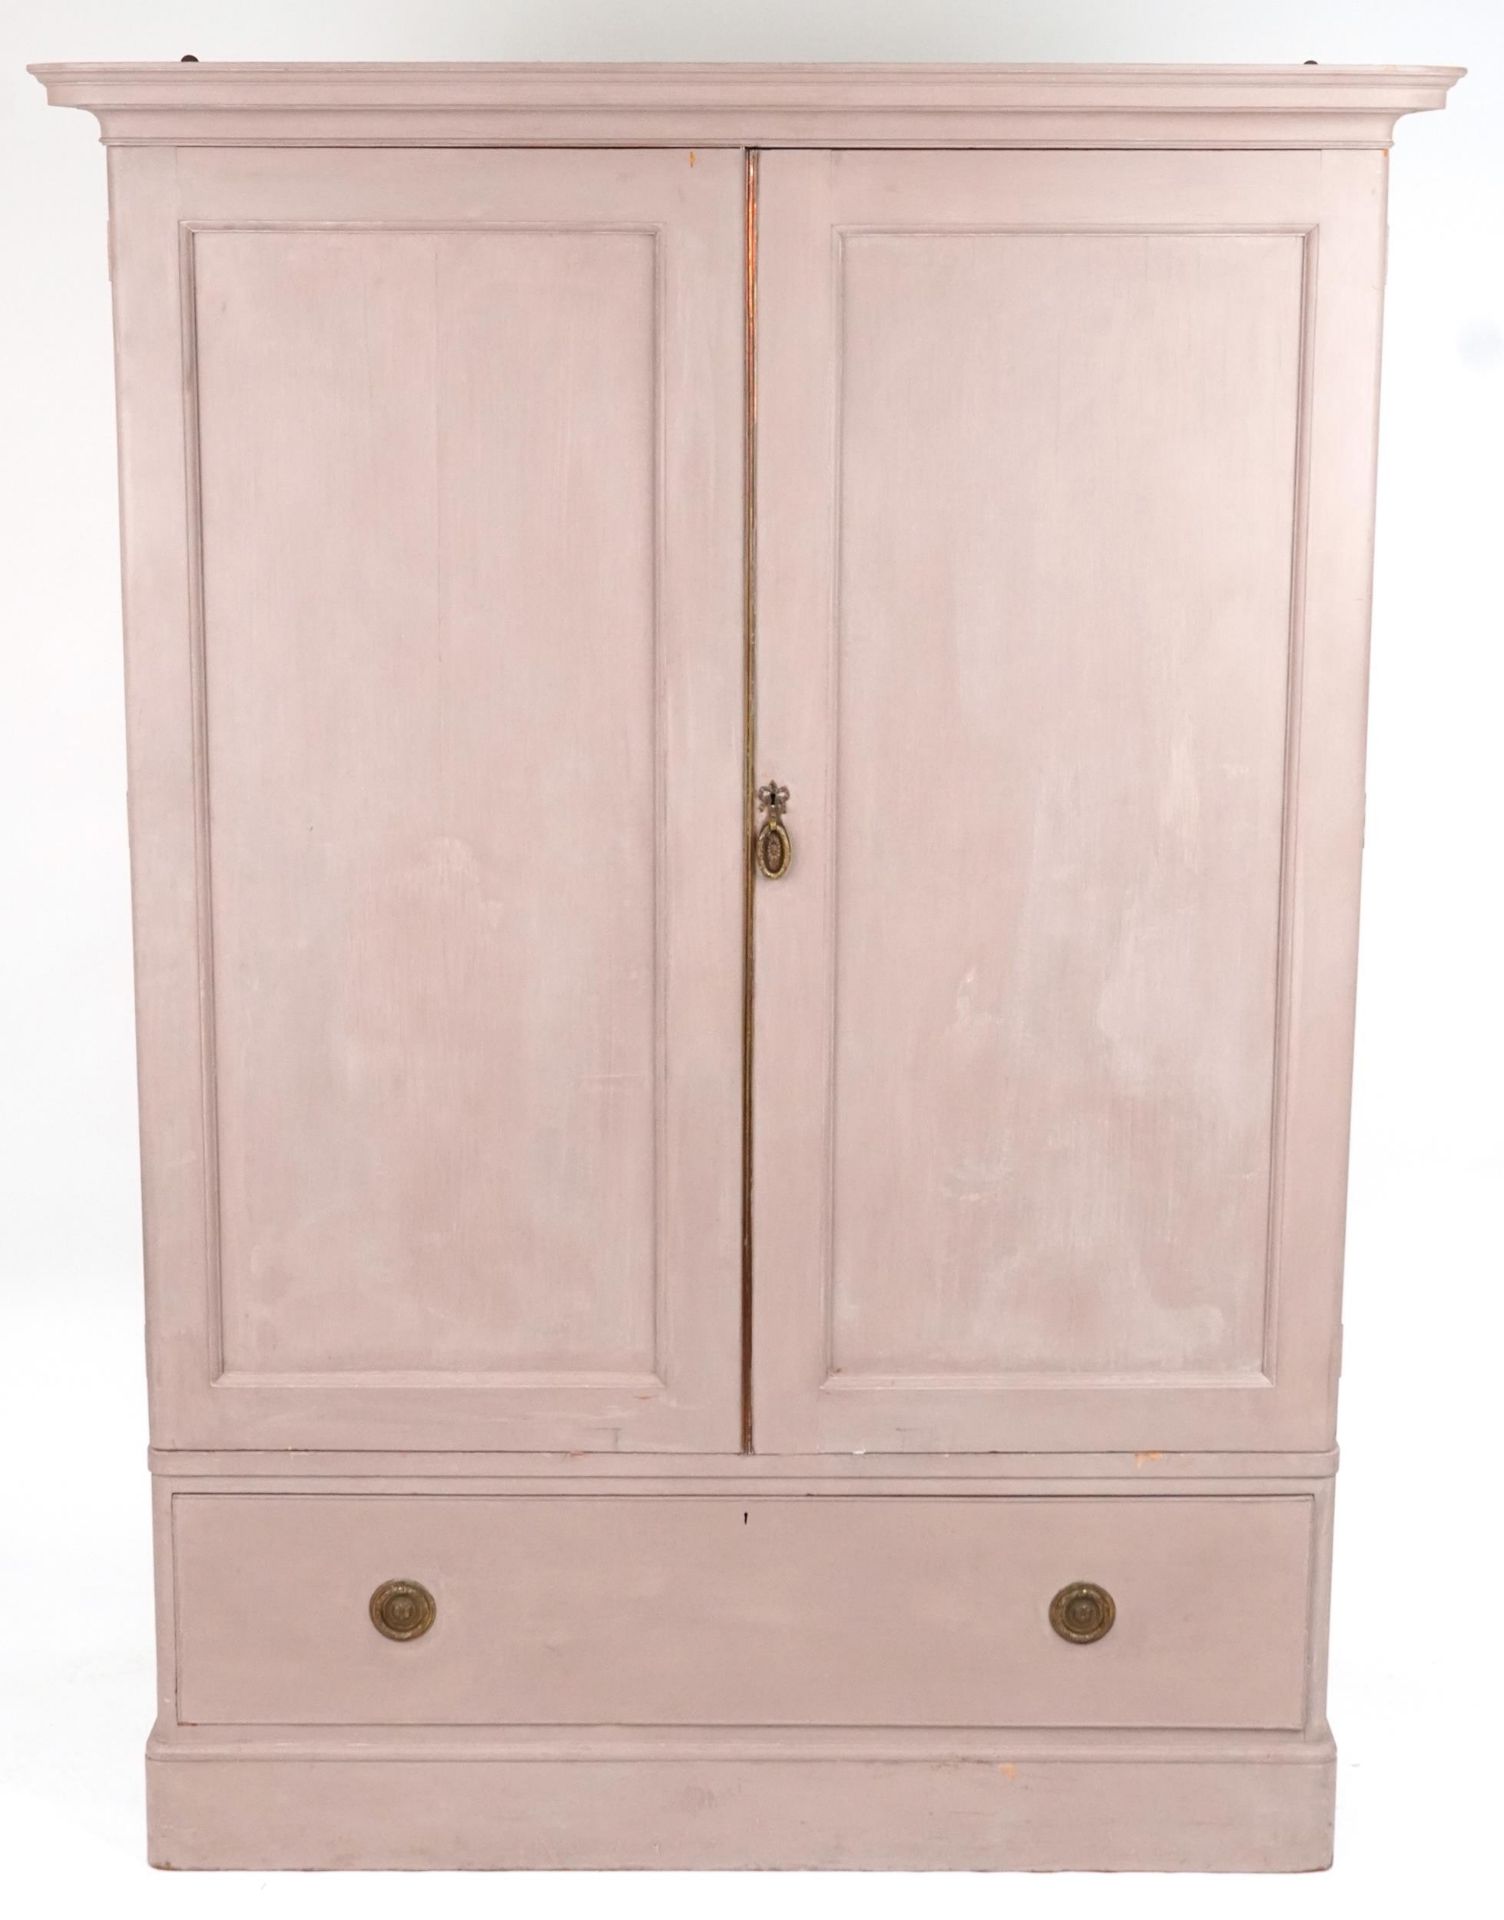 Antique shabby chic linen fold wardrobe with ornate brass mounts and base drawer, 84cm H x 133.5cm W